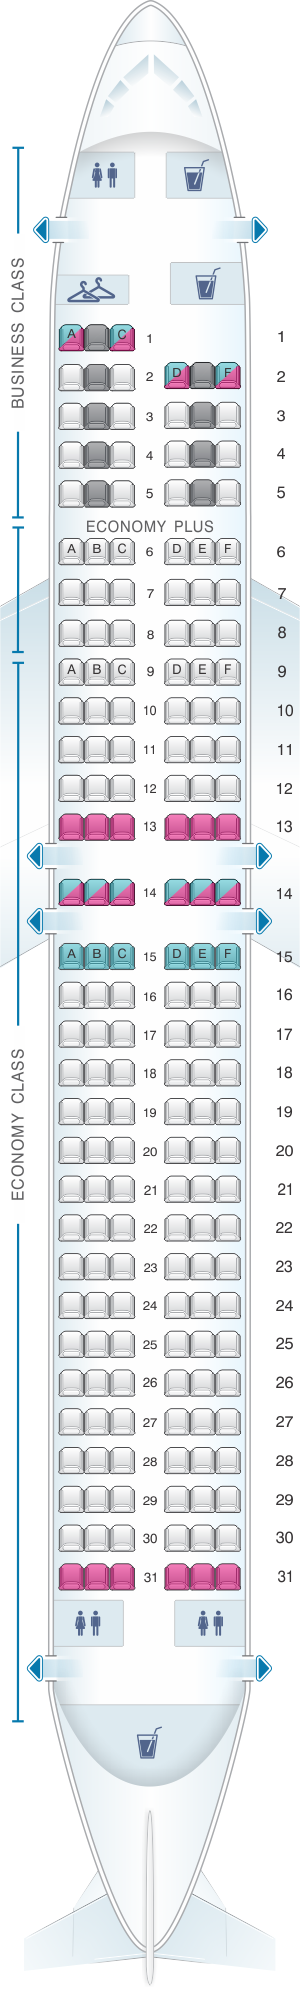 Seat map for LOT Polish Airlines Boeing B737 800